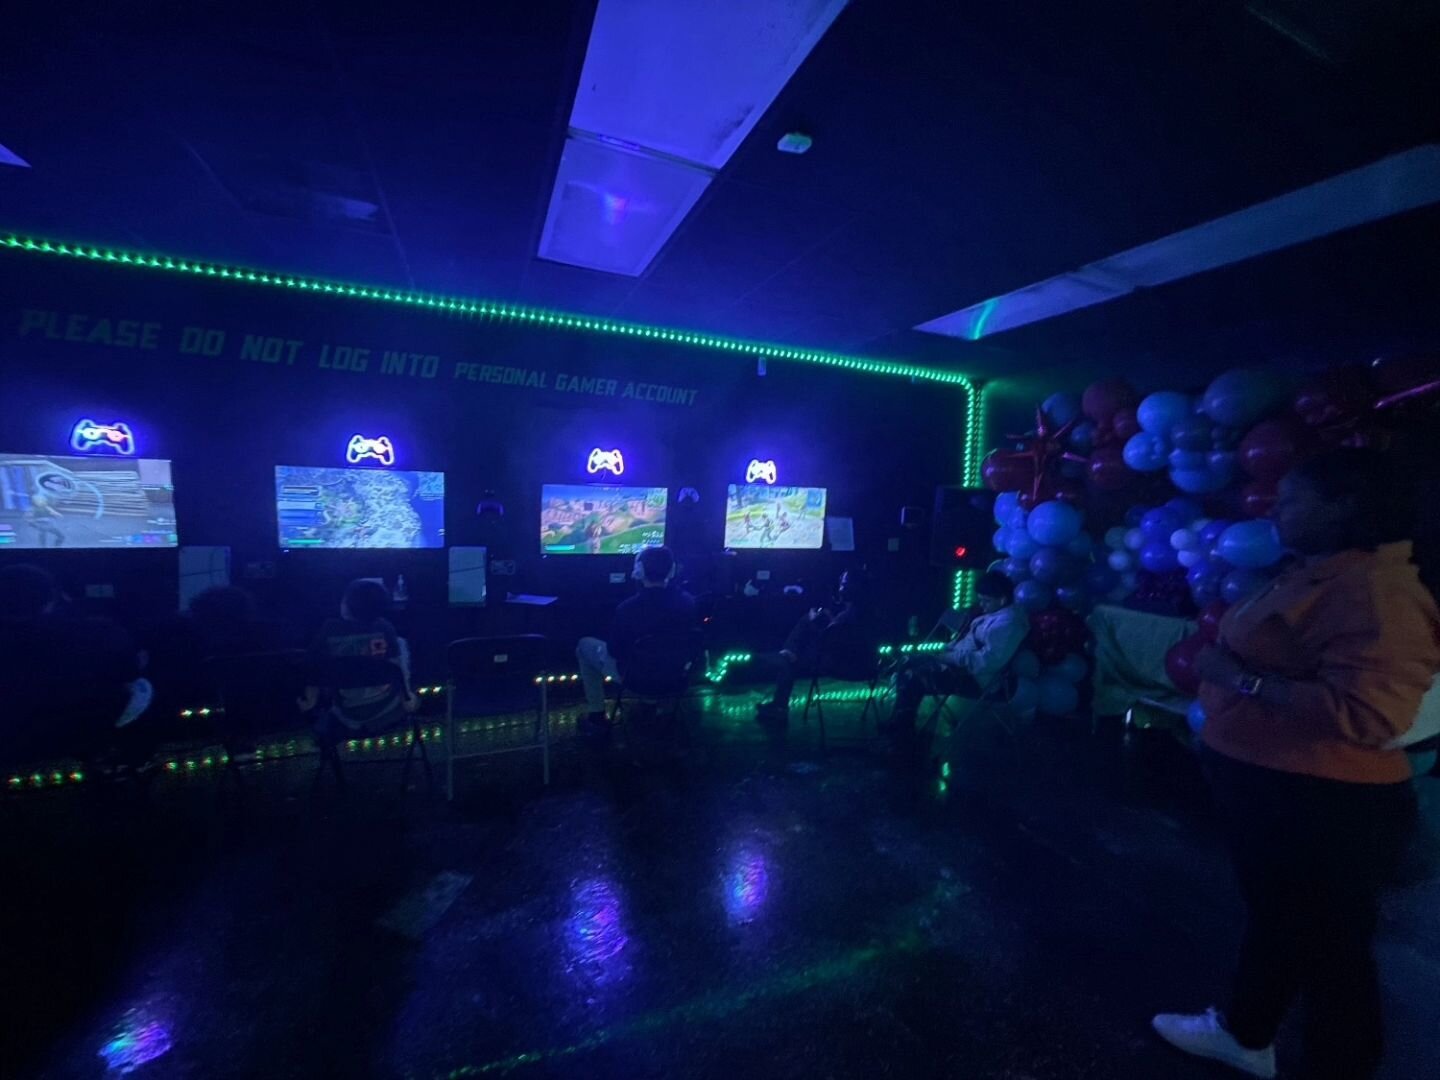 BOOK OUR GAME CENTER TODAY !! For all kinds of events we got all you need from latest consoles/games to decorations, food, soft play, virtual reality etc... Give us a call now on (209) 990-9118 #takekontrol we are right here in Stockton at The K.A.Y.